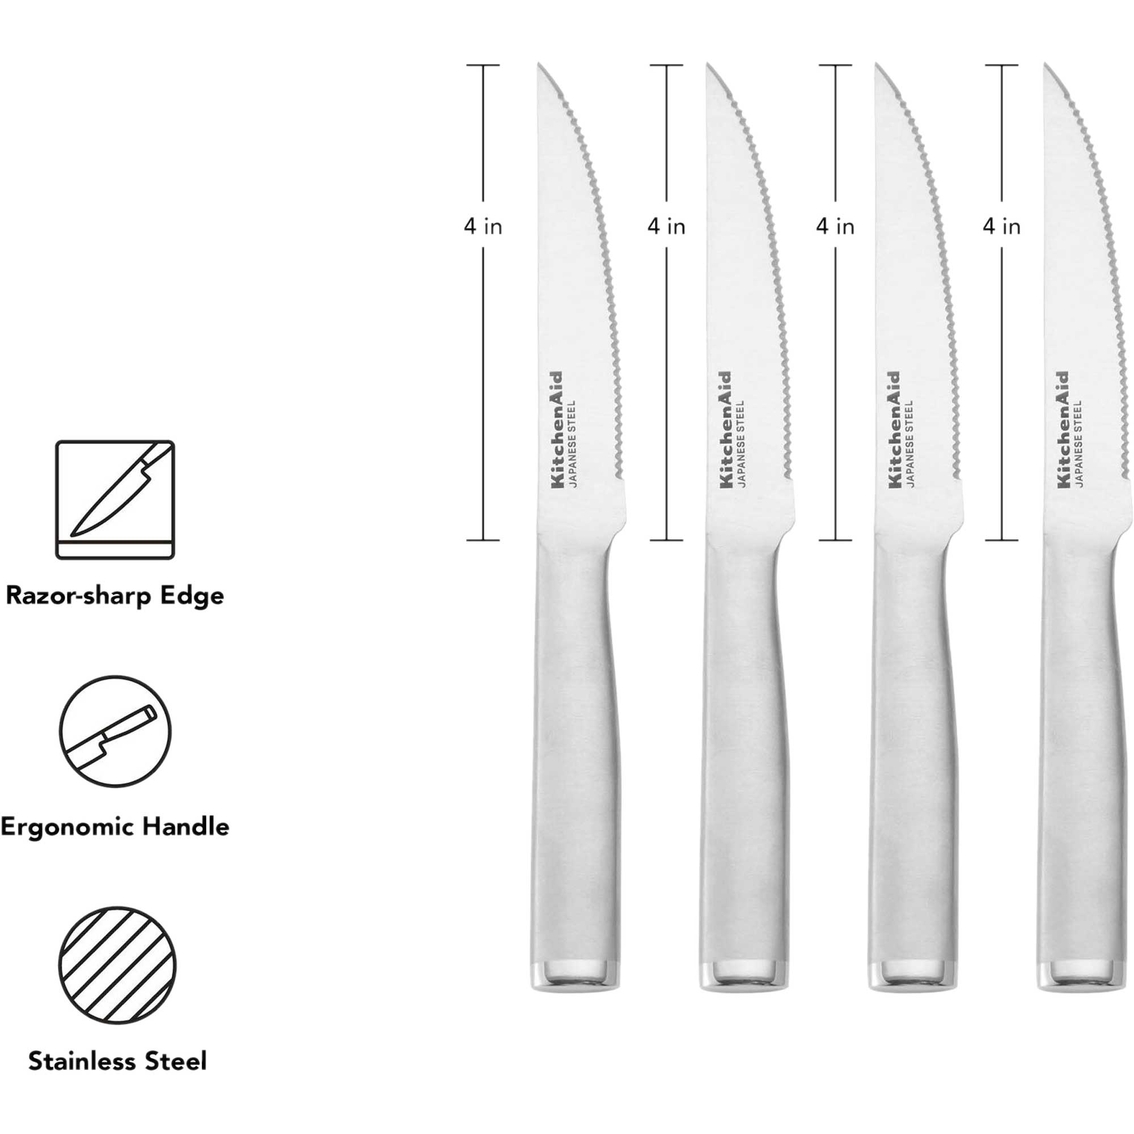 Kitchenaid Gourmet 4.5 In. Serrated Steak Knives 4 Pc., Cutlery, Household